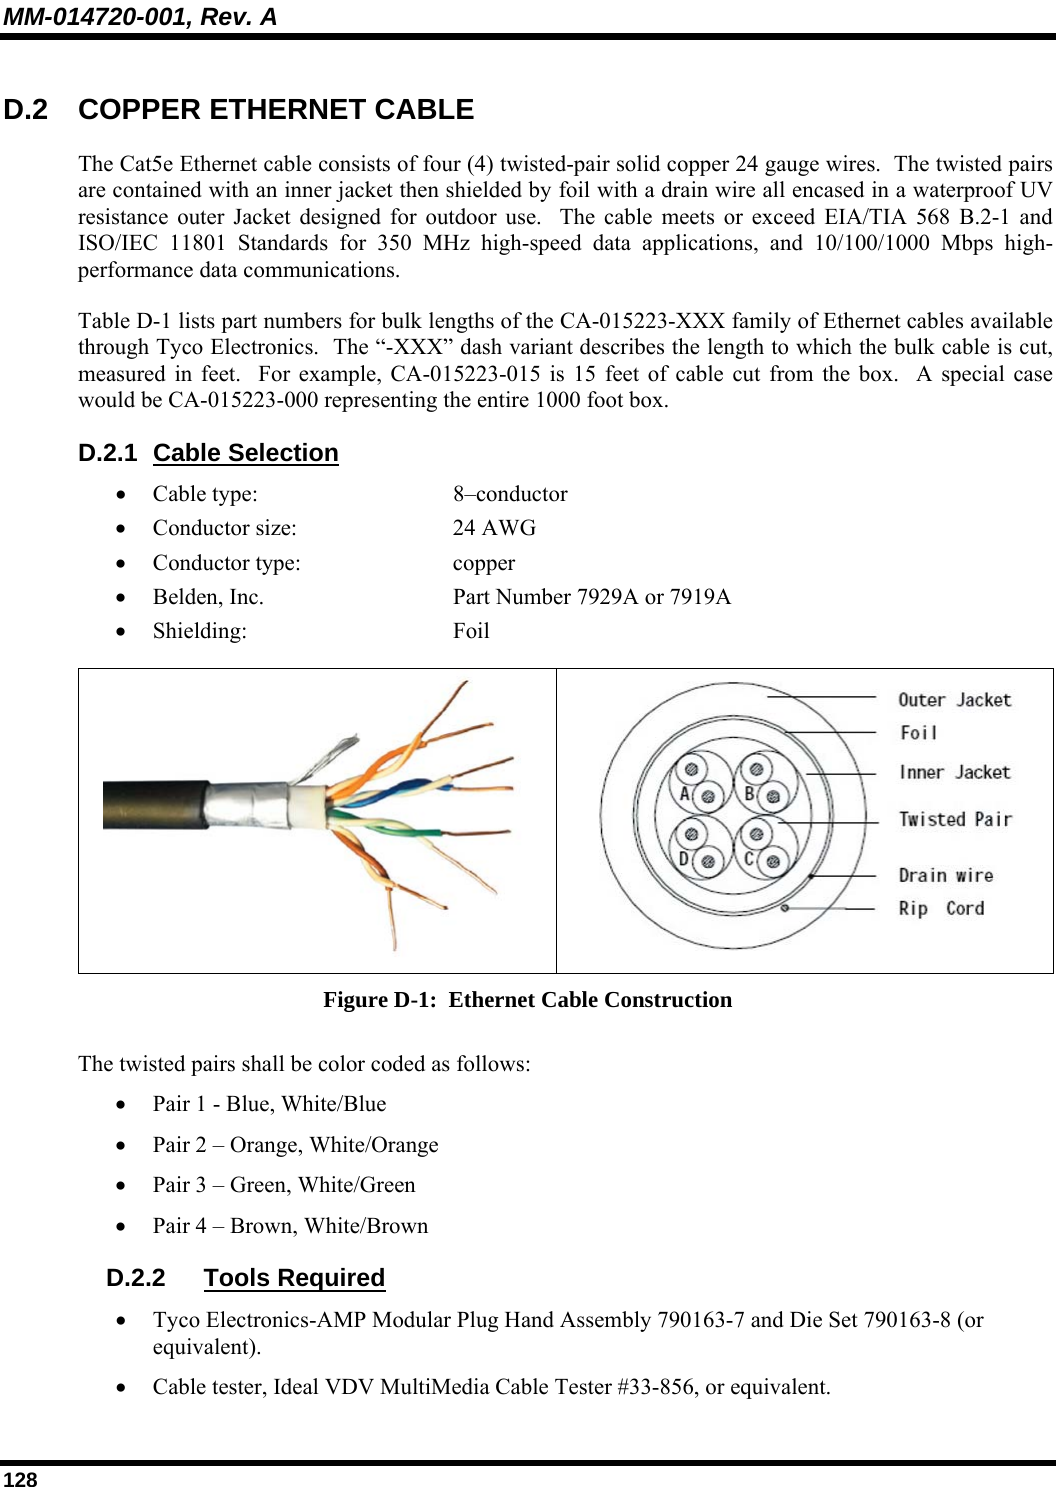 MM-014720-001, Rev. A 128 D.2  COPPER ETHERNET CABLE The Cat5e Ethernet cable consists of four (4) twisted-pair solid copper 24 gauge wires.  The twisted pairs are contained with an inner jacket then shielded by foil with a drain wire all encased in a waterproof UV resistance outer Jacket designed for outdoor use.  The cable meets or exceed EIA/TIA 568 B.2-1 and ISO/IEC 11801 Standards for 350 MHz high-speed data applications, and 10/100/1000 Mbps high-performance data communications. Table D-1 lists part numbers for bulk lengths of the CA-015223-XXX family of Ethernet cables available through Tyco Electronics.  The “-XXX” dash variant describes the length to which the bulk cable is cut, measured in feet.  For example, CA-015223-015 is 15 feet of cable cut from the box.  A special case would be CA-015223-000 representing the entire 1000 foot box. D.2.1 Cable Selection • Cable type:     8–conductor • Conductor size:   24 AWG • Conductor type:   copper • Belden, Inc.      Part Number 7929A or 7919A • Shielding:   Foil    Figure D-1:  Ethernet Cable Construction The twisted pairs shall be color coded as follows: • Pair 1 - Blue, White/Blue • Pair 2 – Orange, White/Orange • Pair 3 – Green, White/Green • Pair 4 – Brown, White/Brown D.2.2 Tools Required • Tyco Electronics-AMP Modular Plug Hand Assembly 790163-7 and Die Set 790163-8 (or equivalent). • Cable tester, Ideal VDV MultiMedia Cable Tester #33-856, or equivalent. 